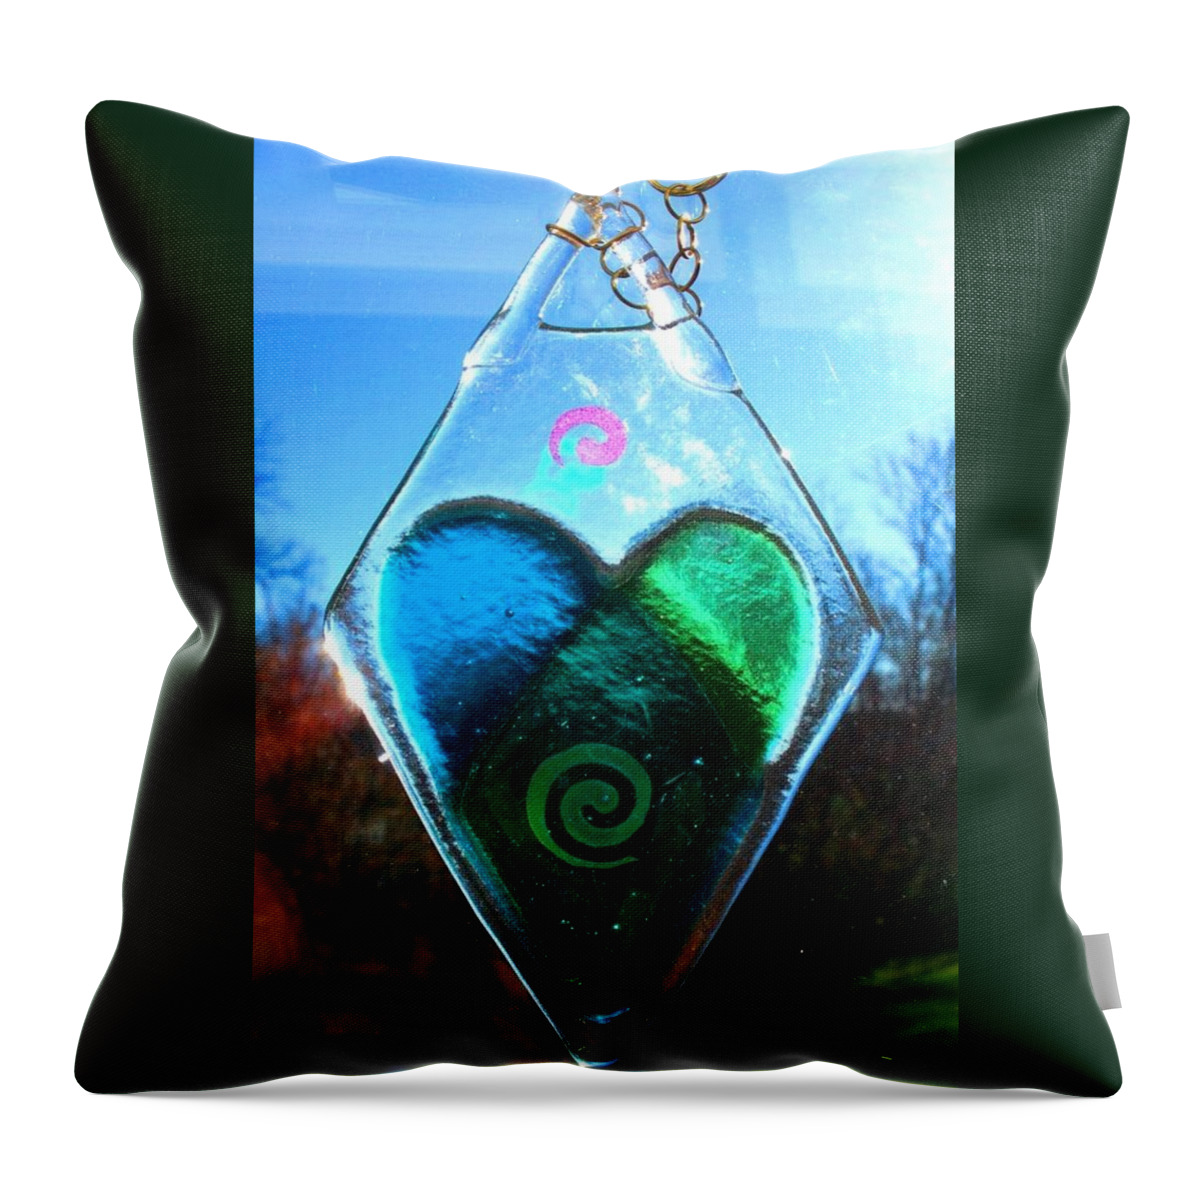 Fused Glass Throw Pillow featuring the glass art Blue Heart by Marian Berg